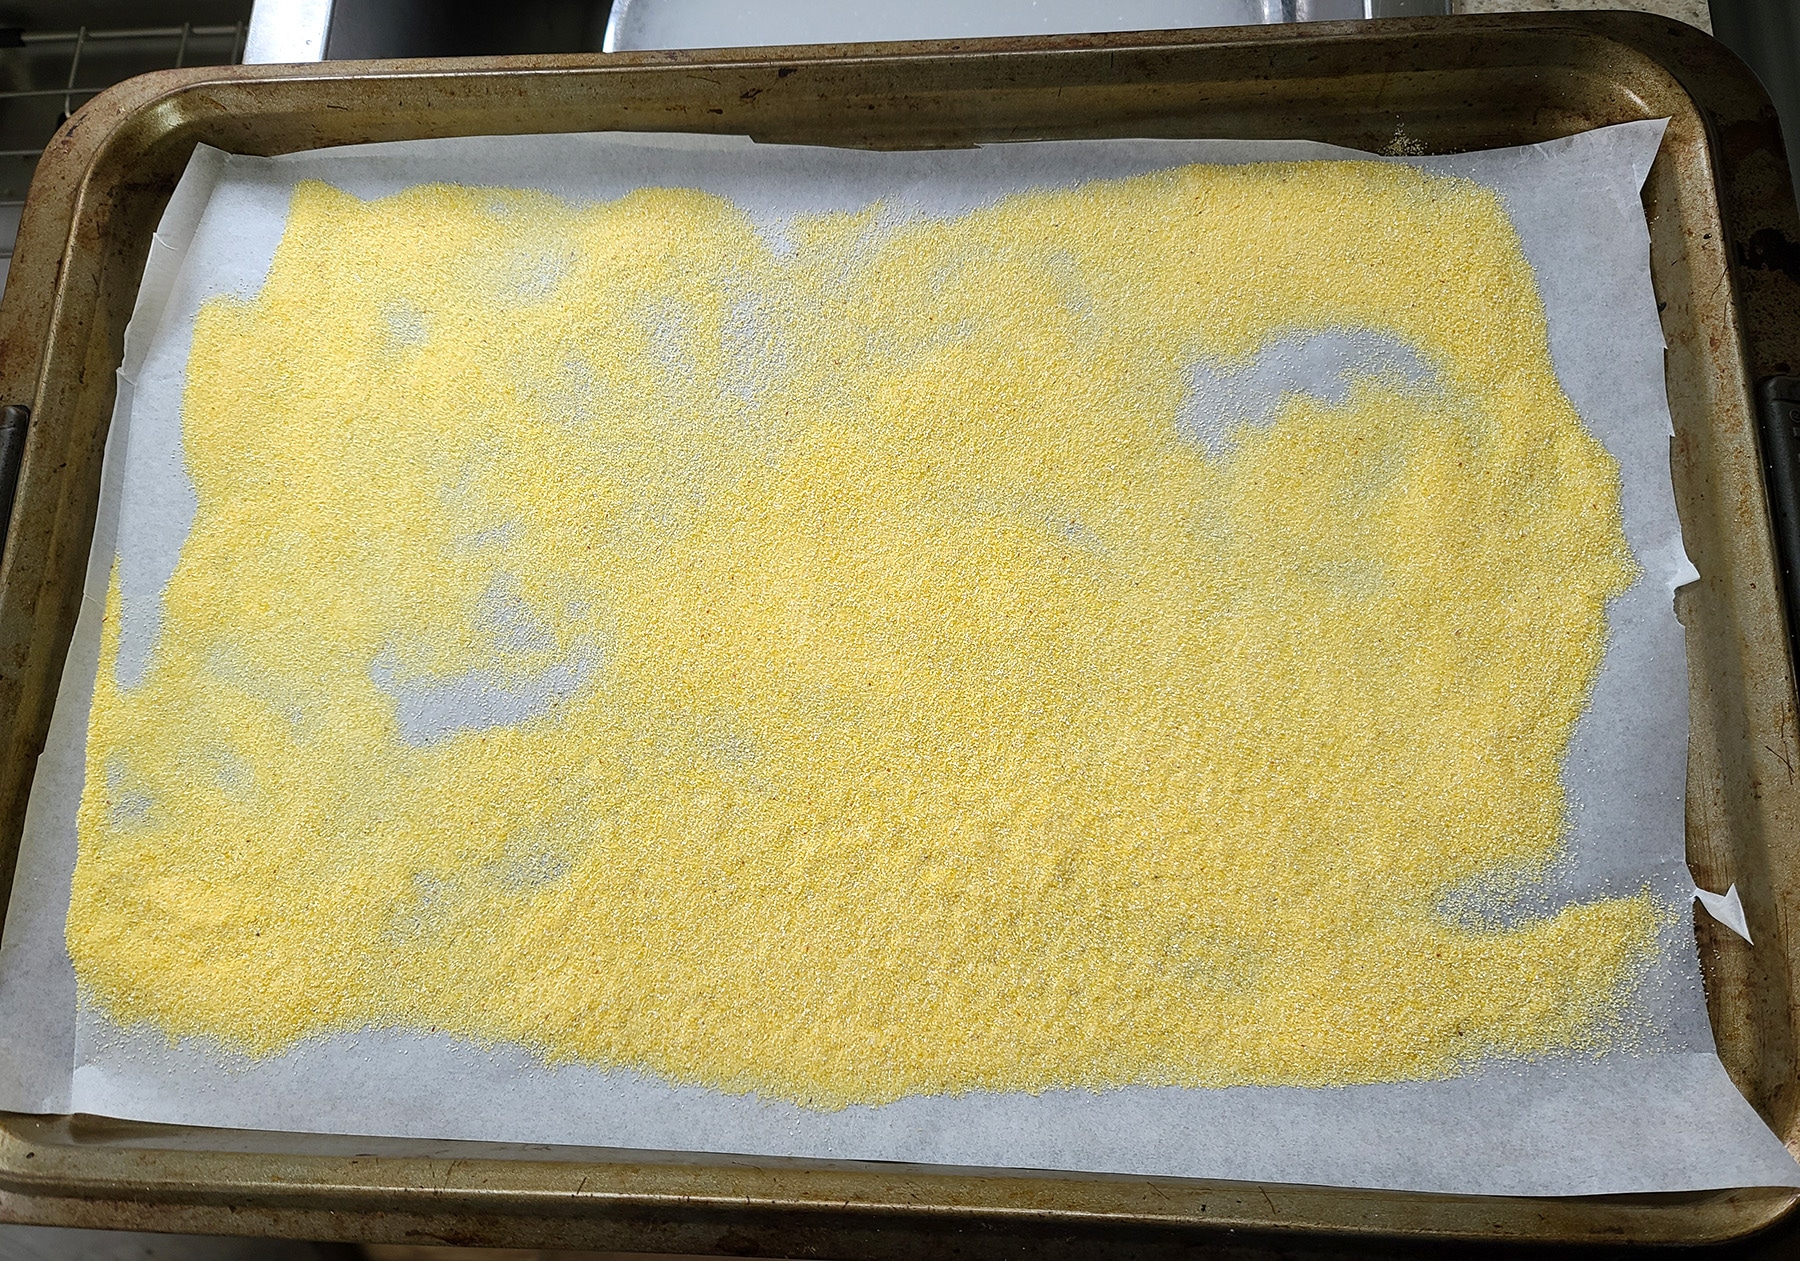 A baking sheet, lined with parchment paper and scattered with cornmeal.